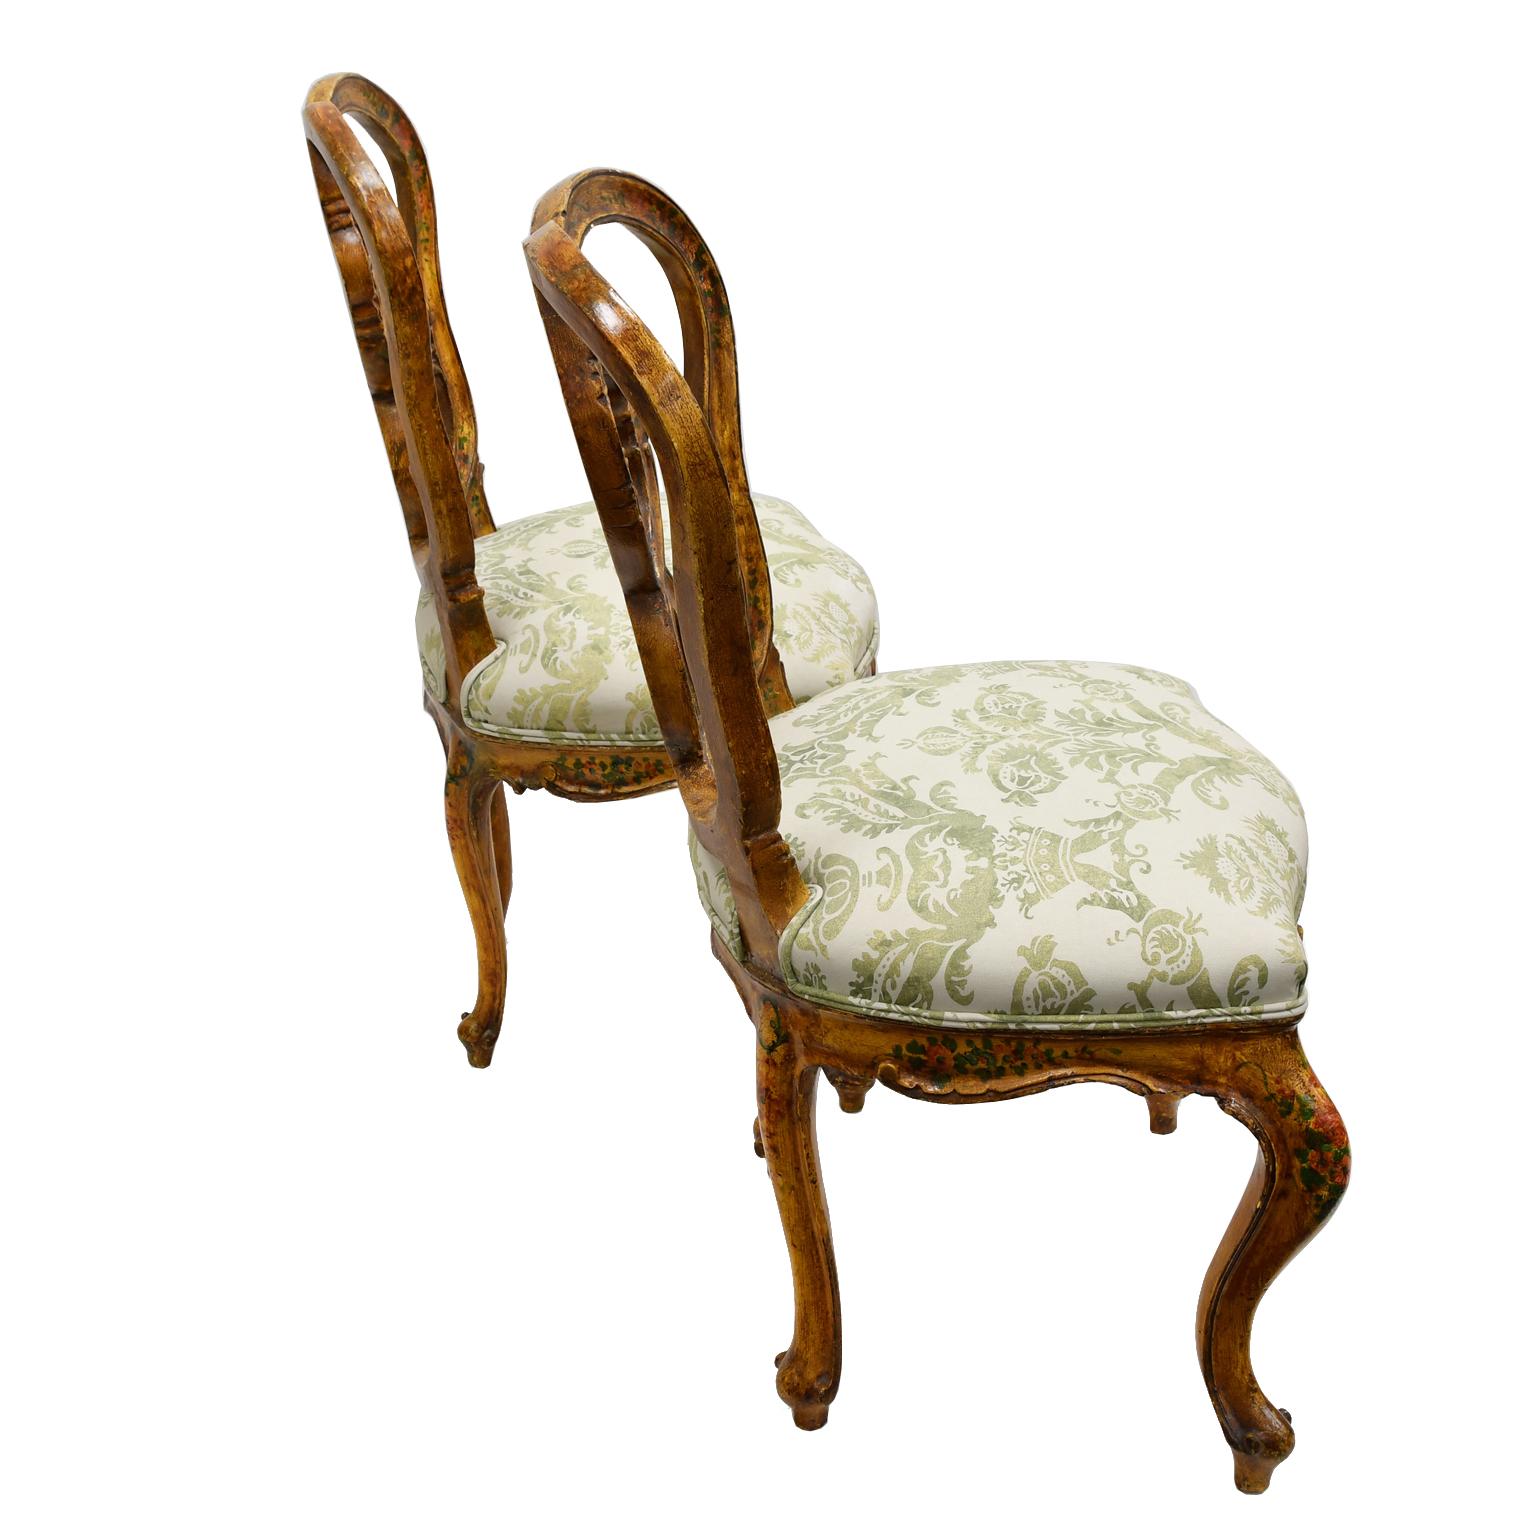 19th Century Pair of Antique Venetian Dining Chairs in Yellow Paint with Flowers & Upholstery